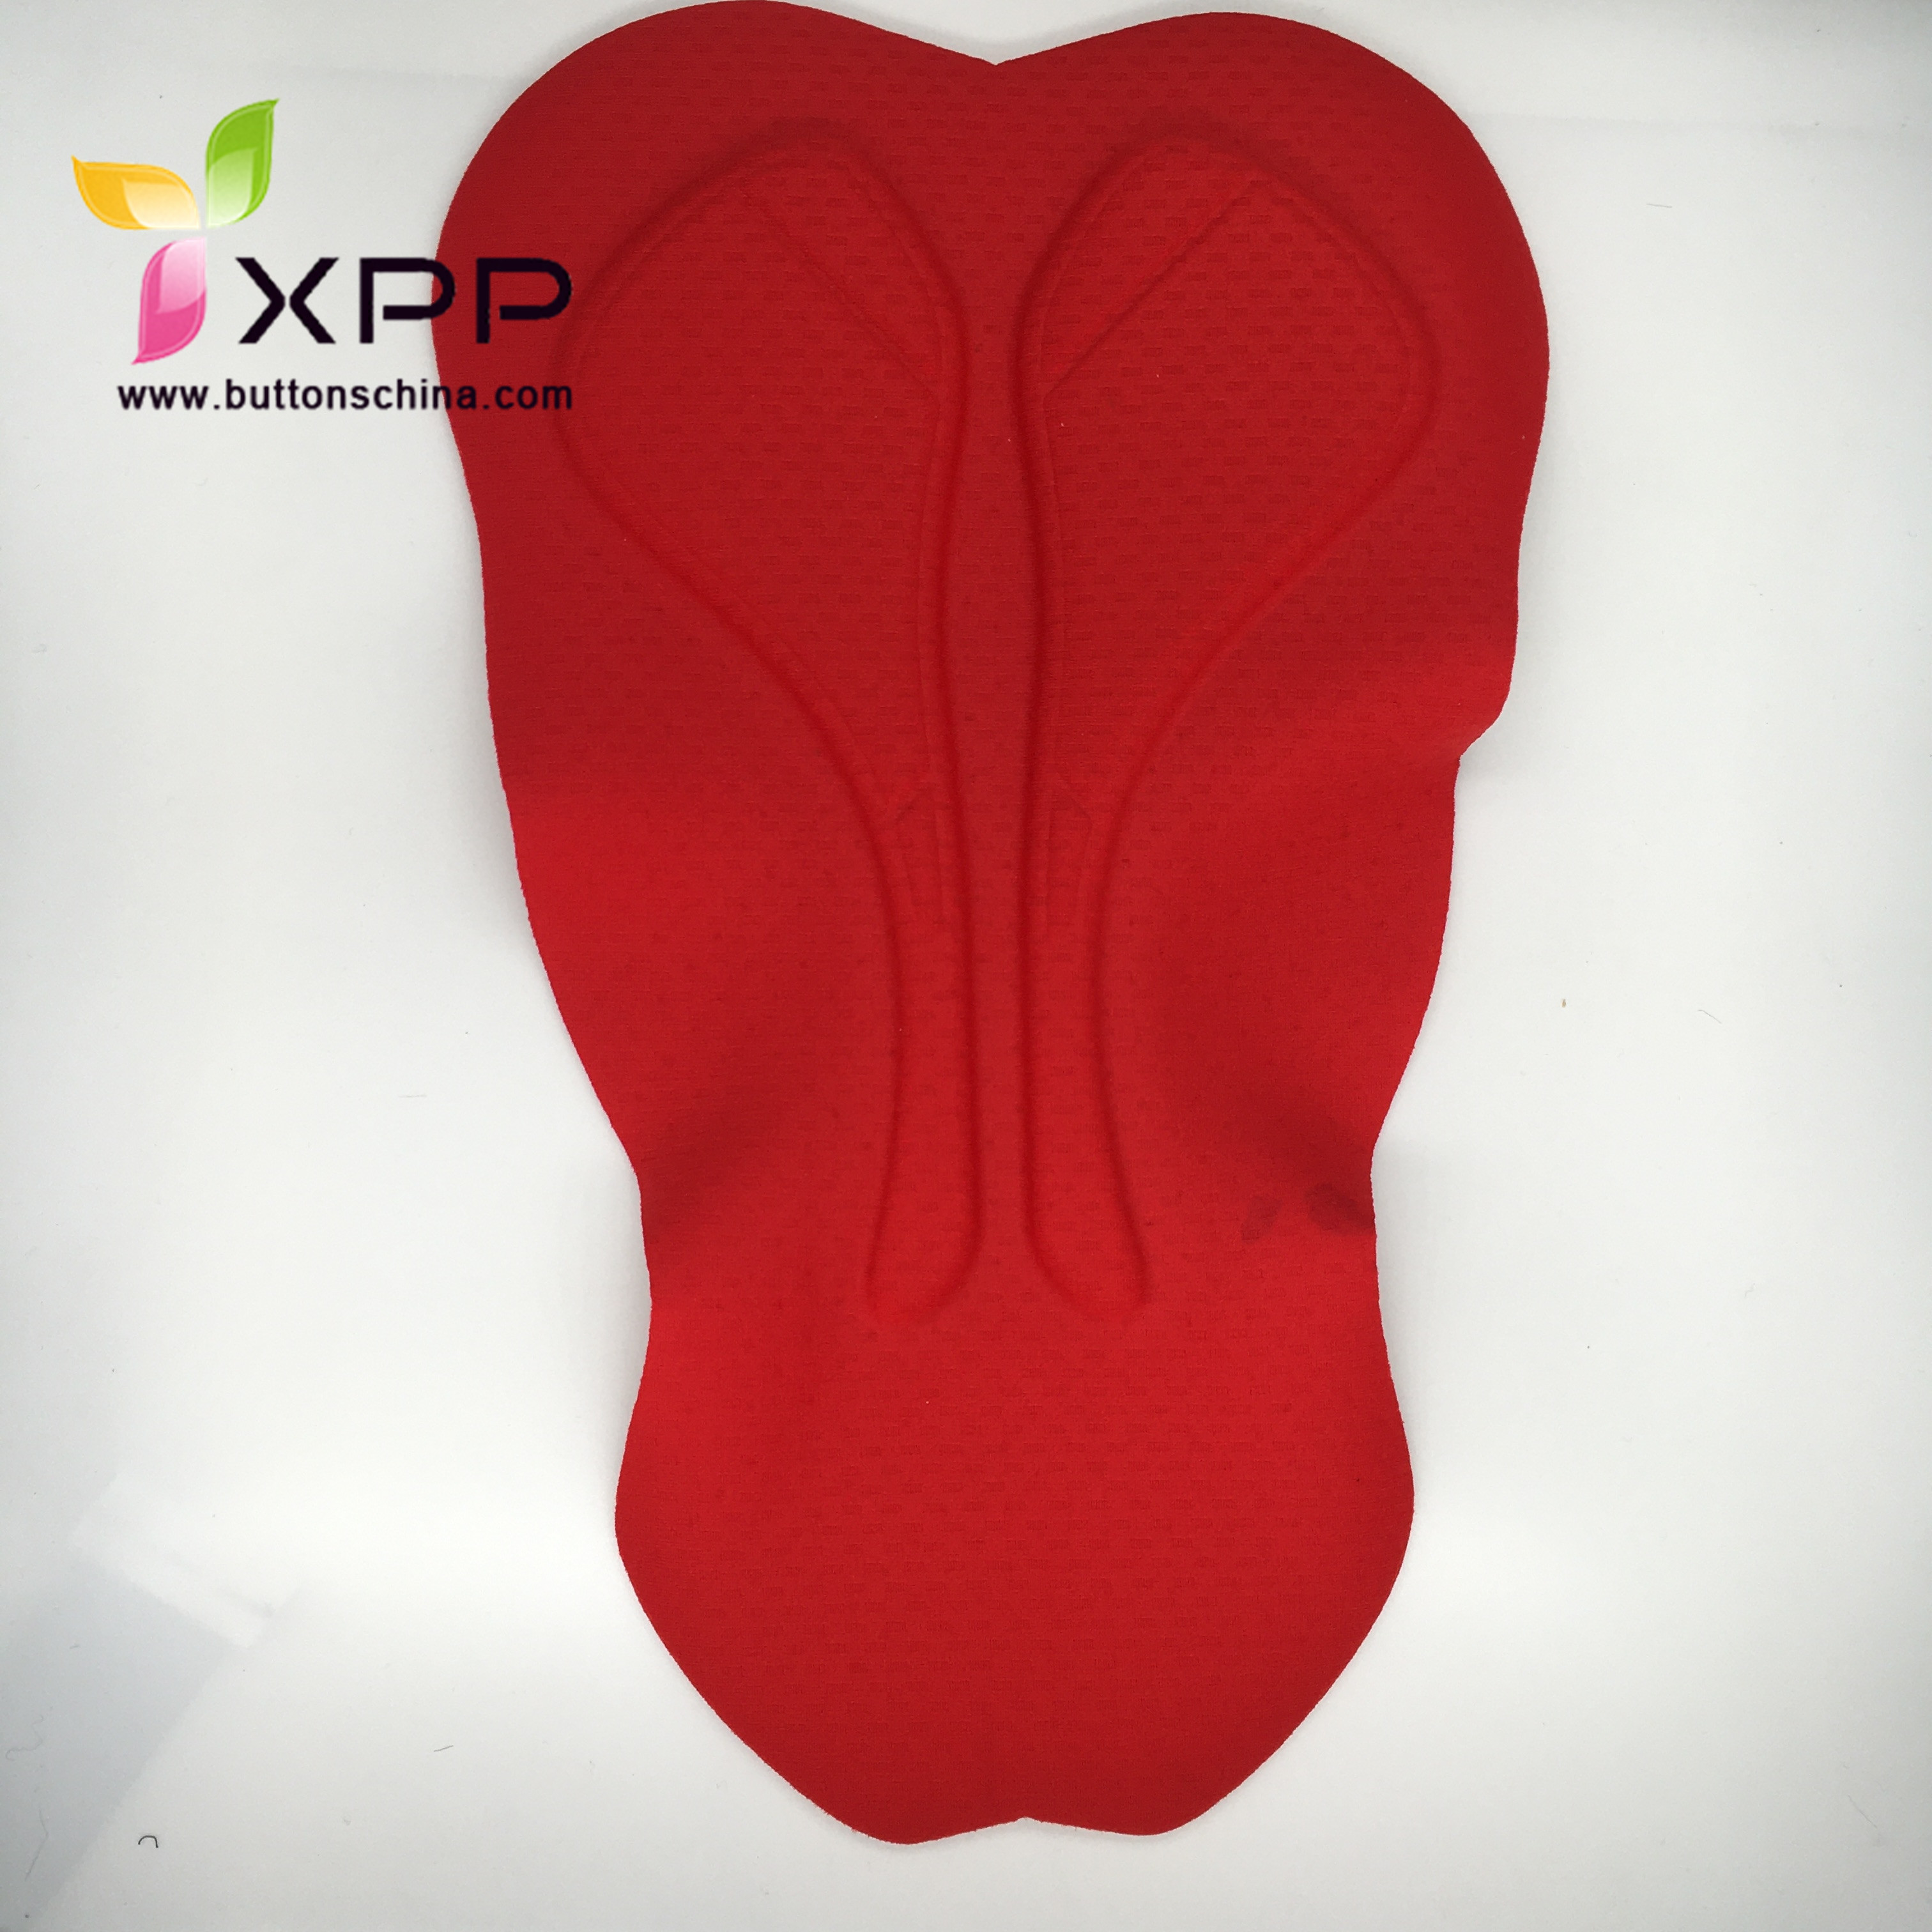  Foam Cycling pad and Cycling Pants Accessories Chamois Coolmax 